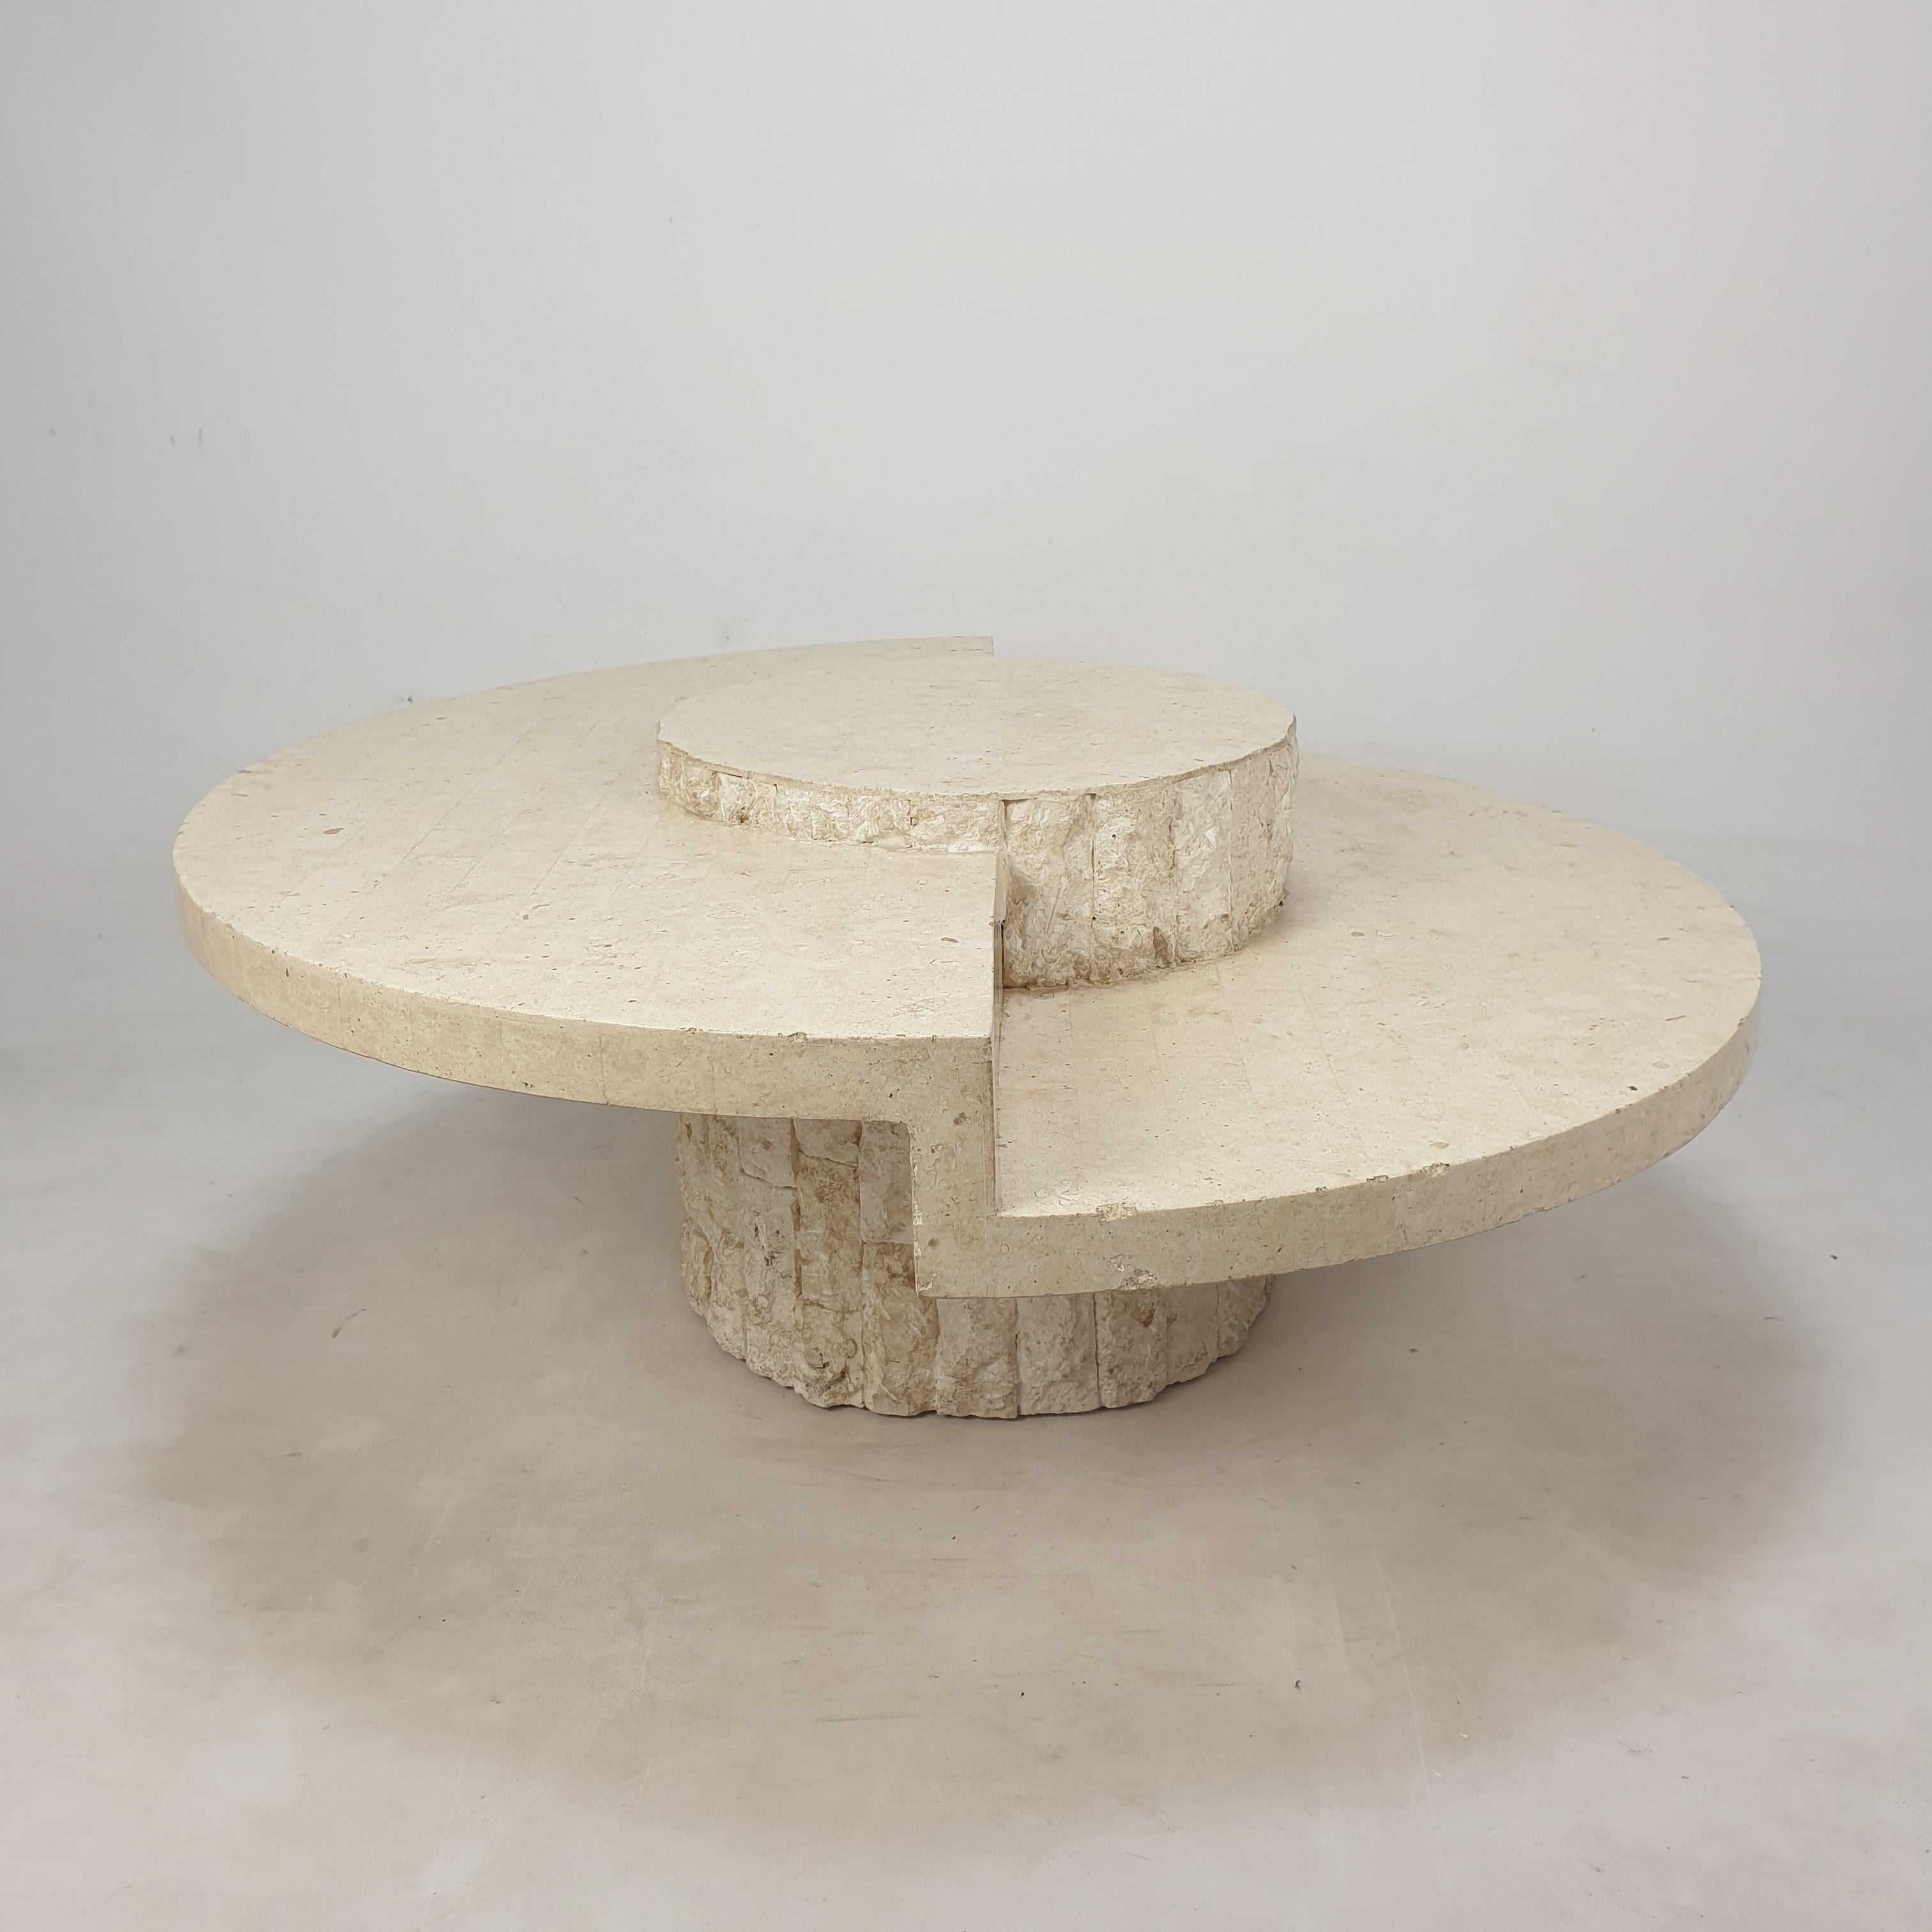 Very nice coffee or side table by Magnussen Ponte, 1980's.

This stunning table is made of rough edged brick motif Mactan stone.